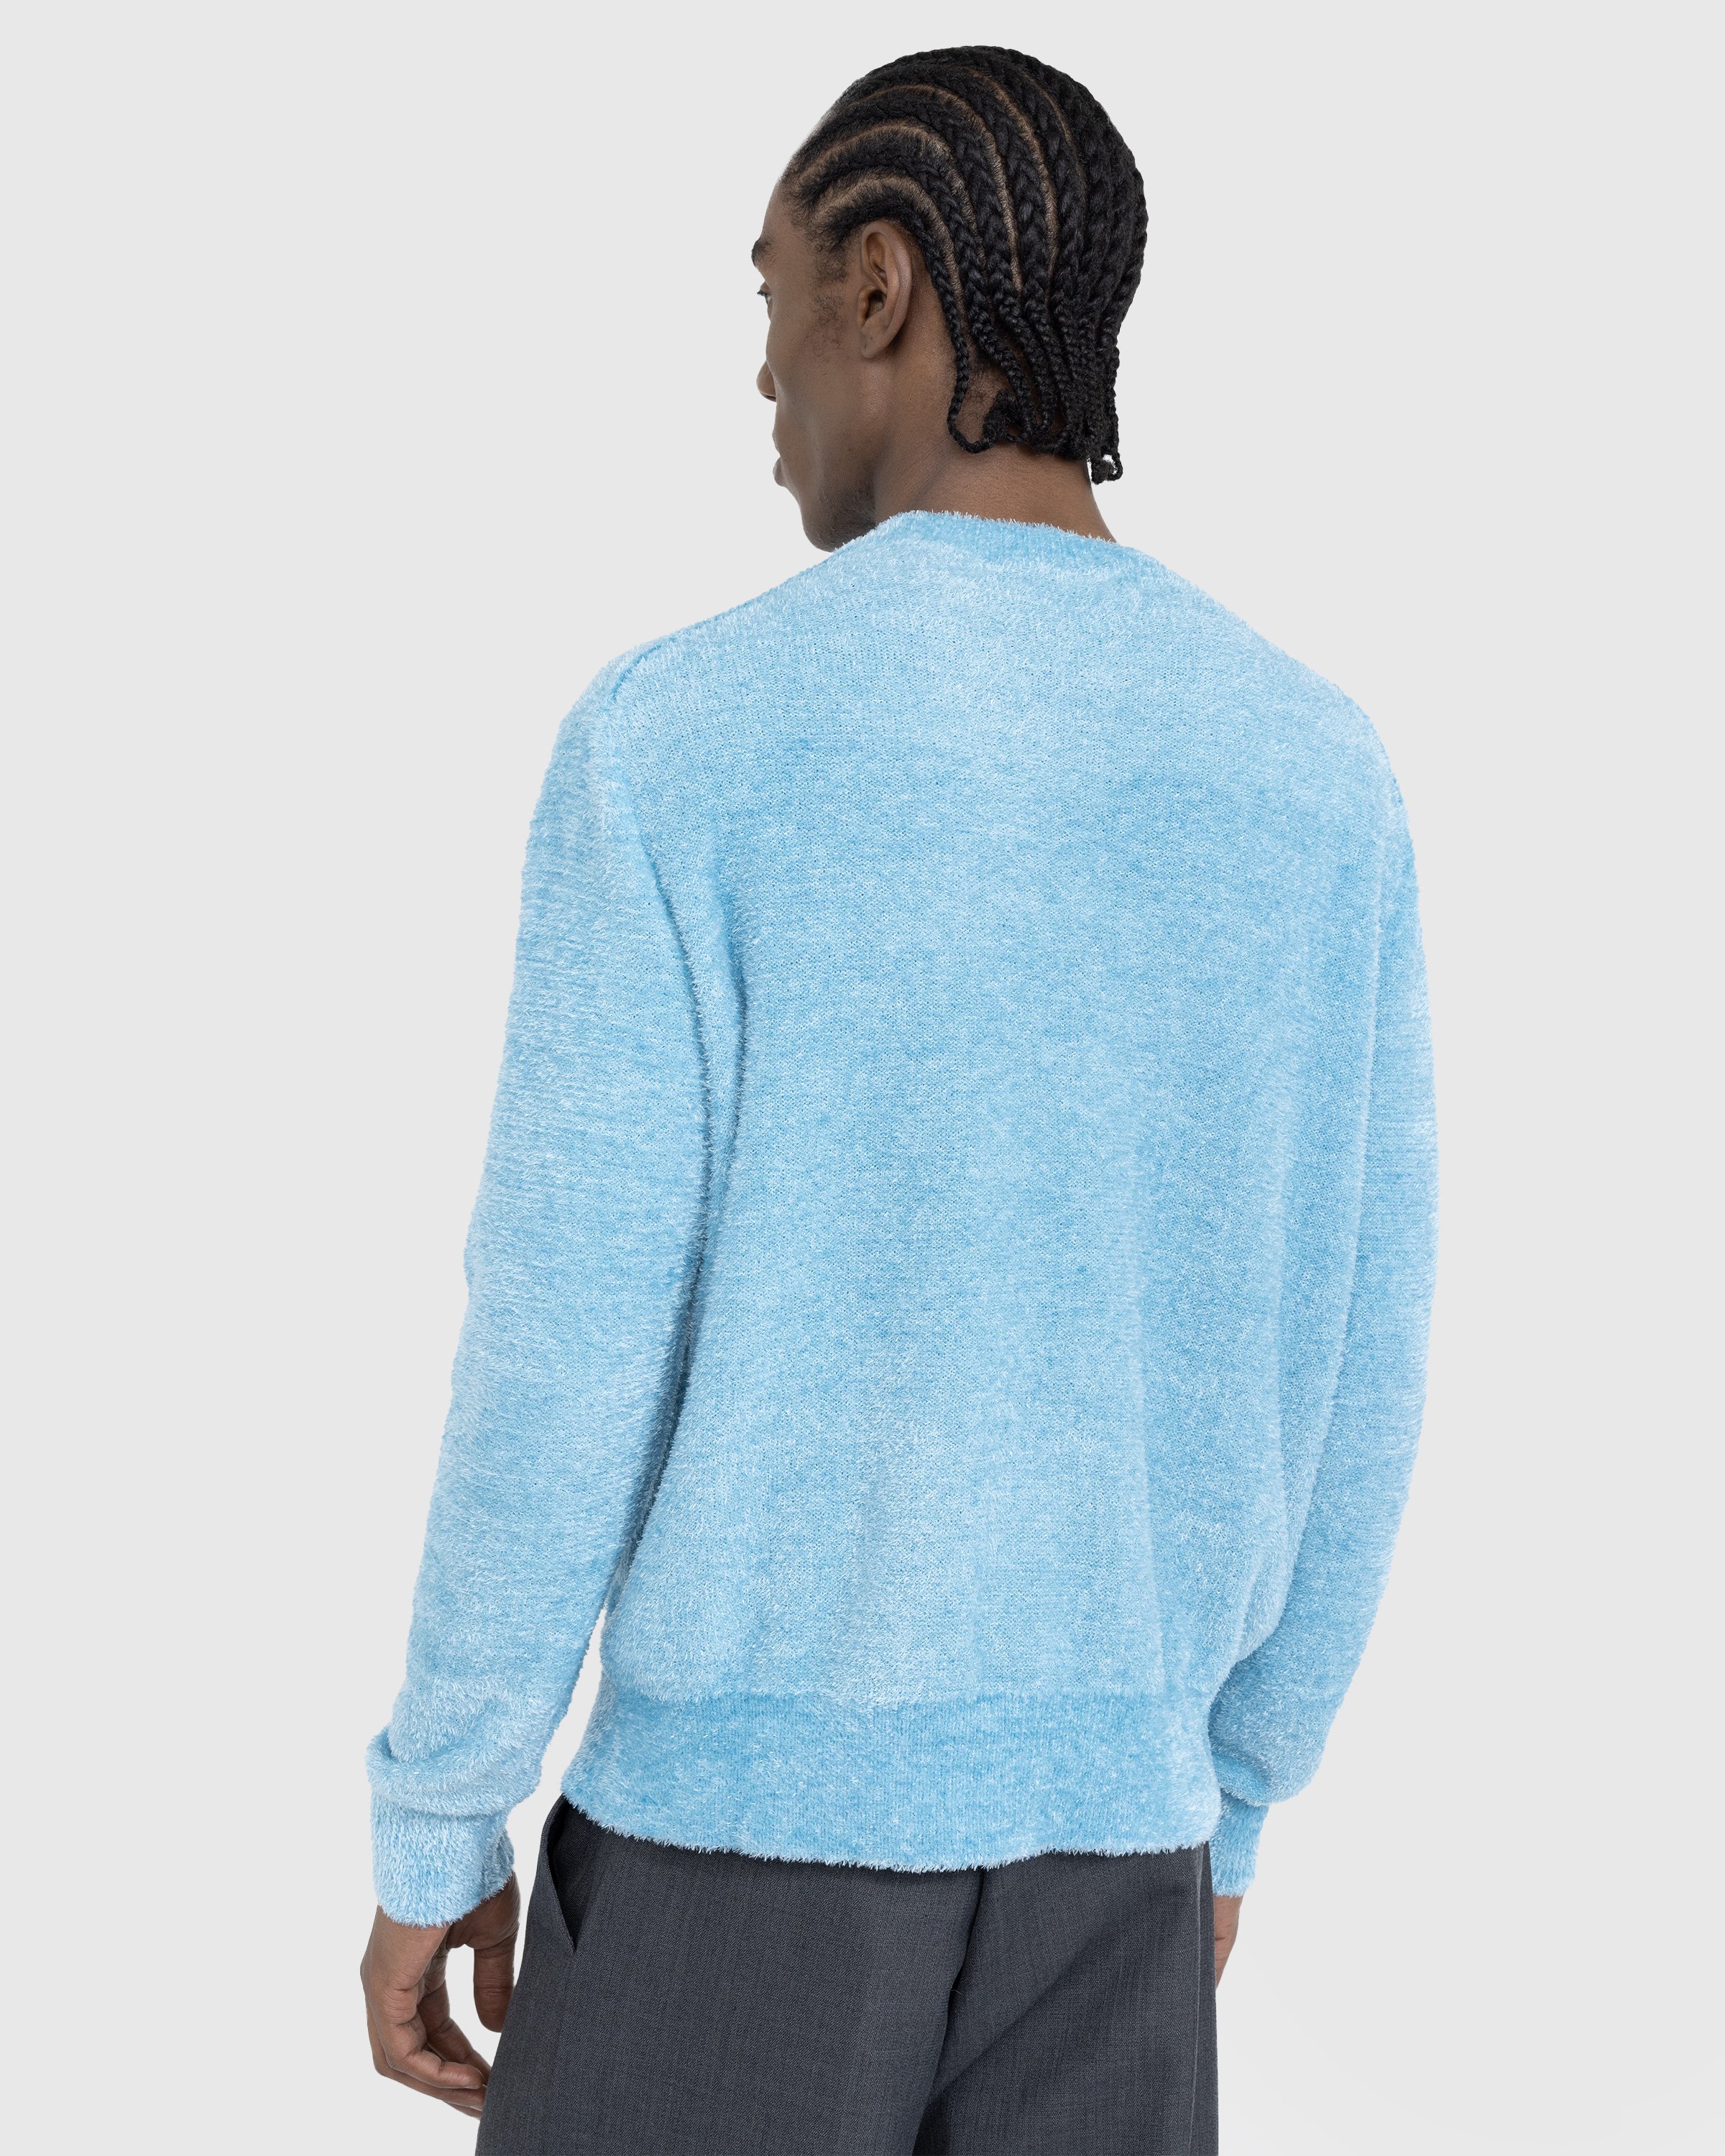 Acne Studios - Textured Sweater Teal Blue - Clothing - Blue - Image 3